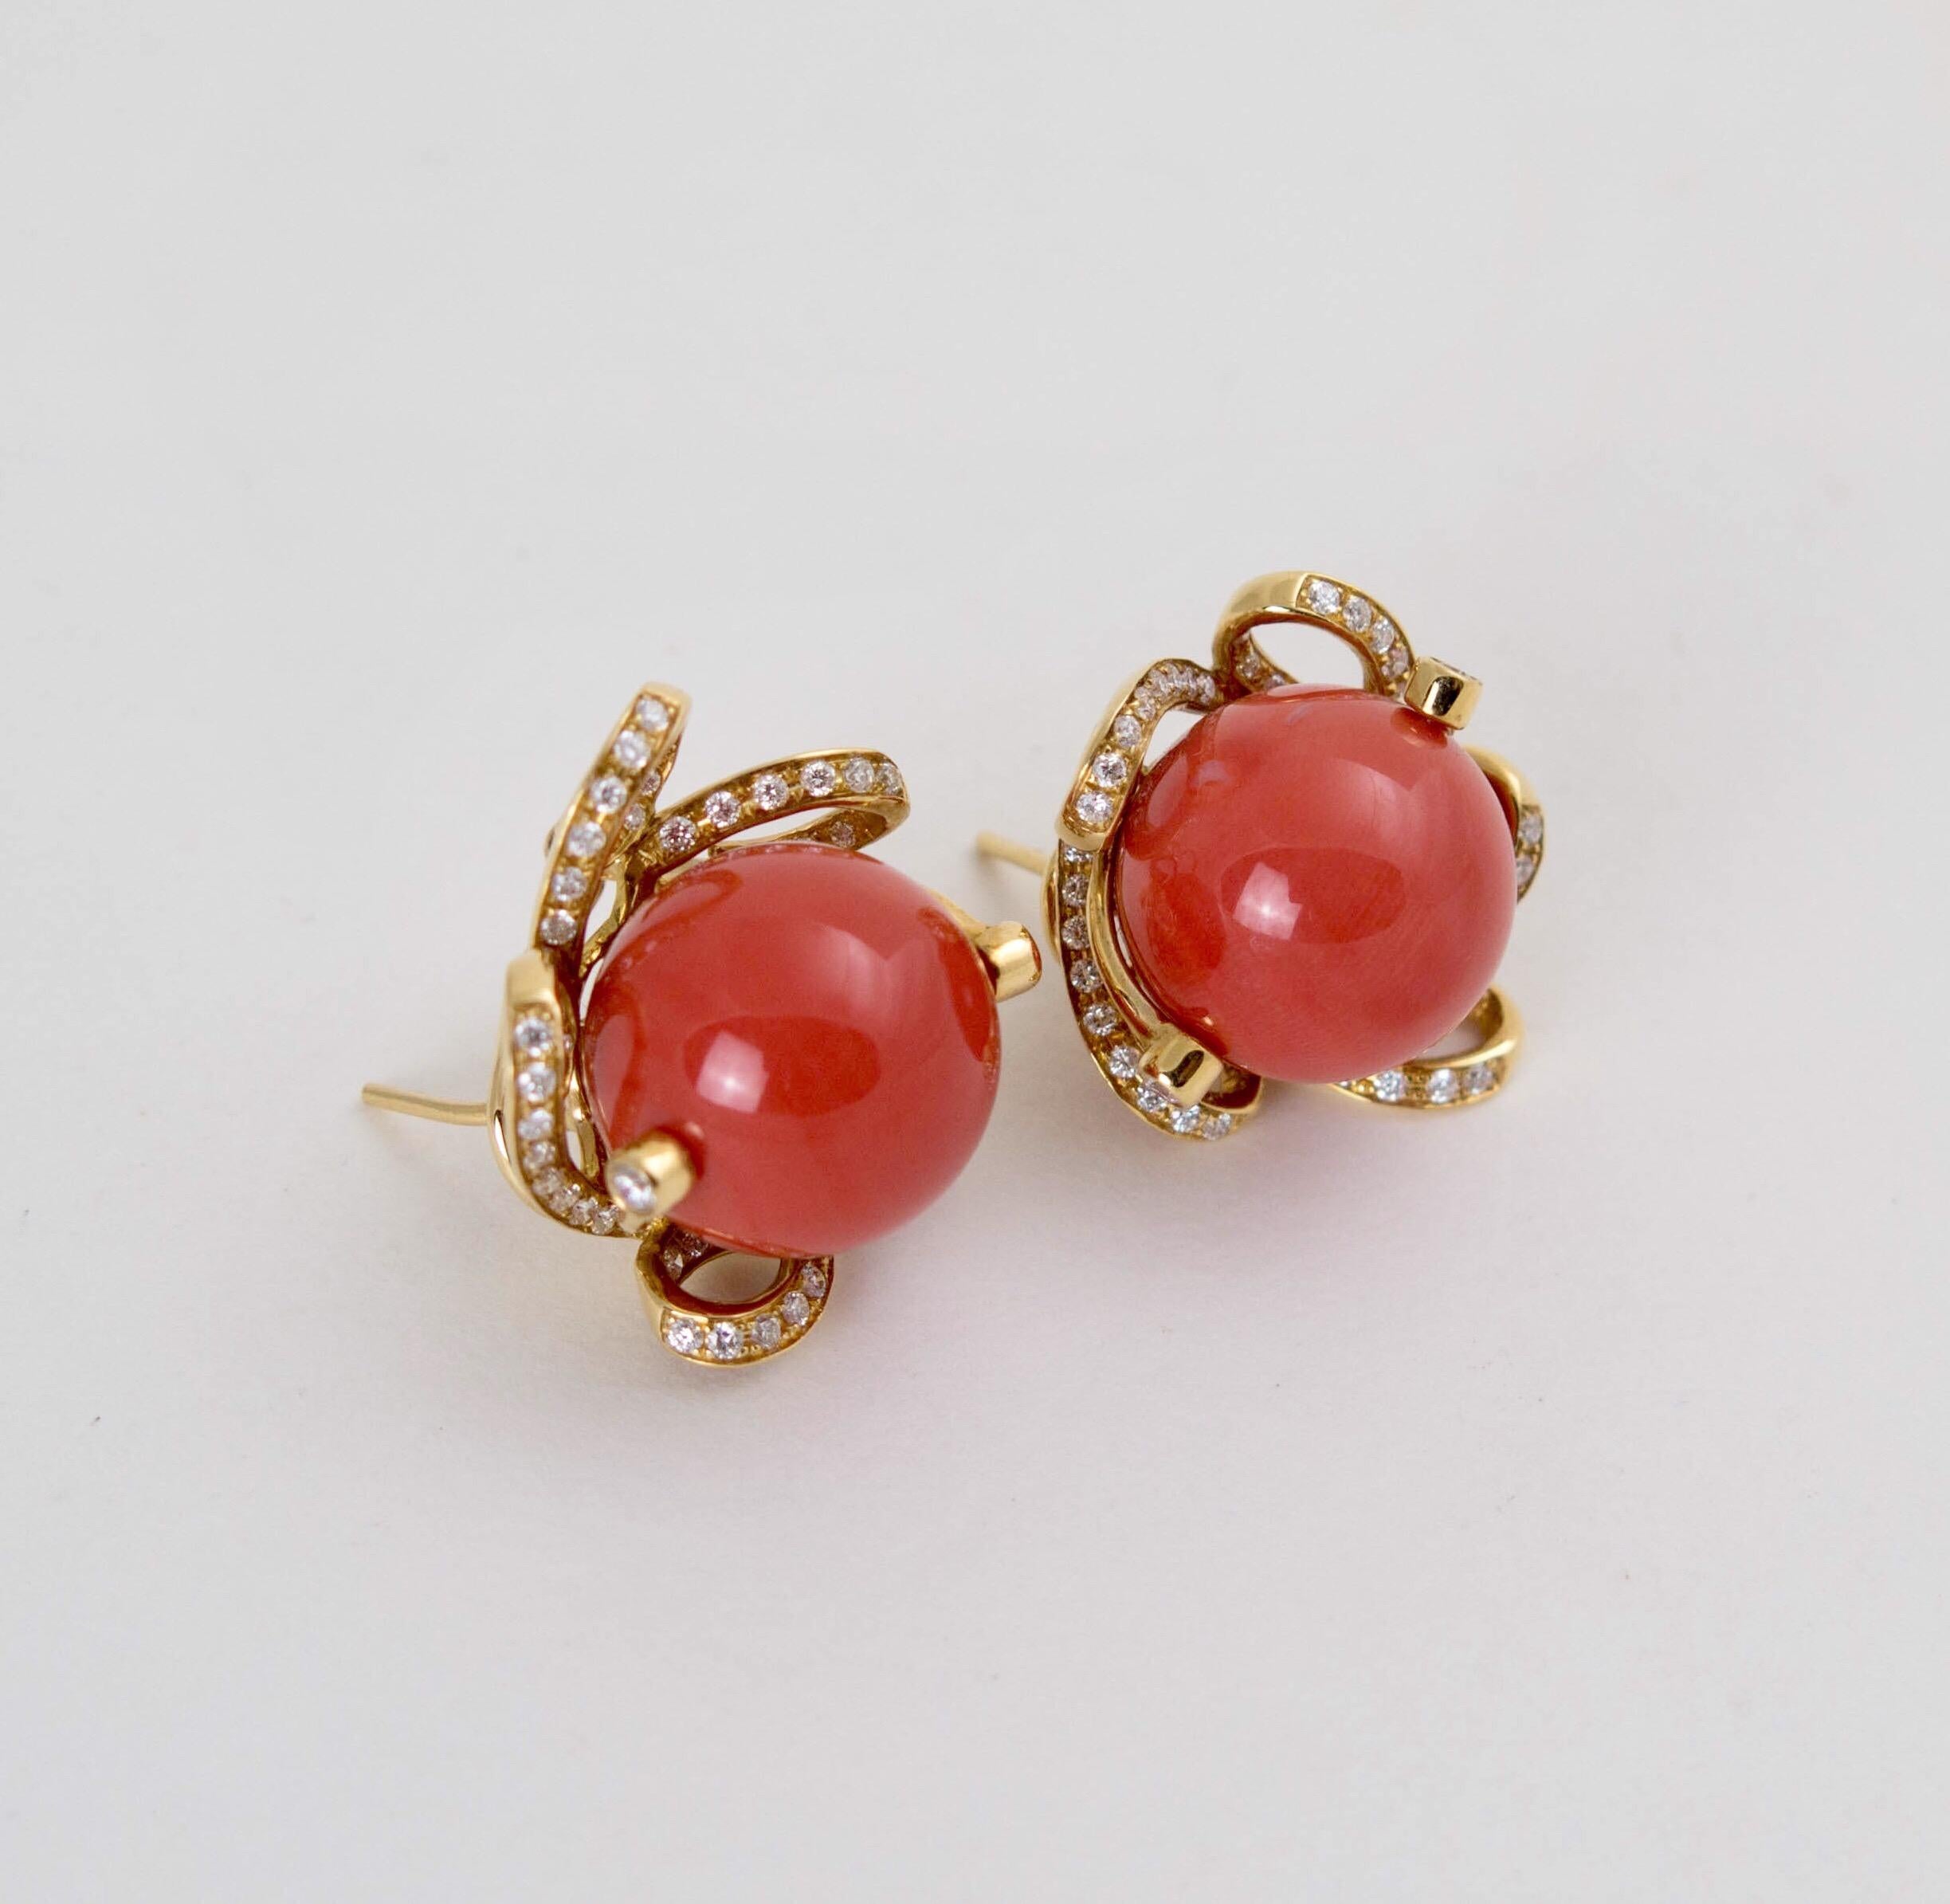 A beautiful pair of natural coral, 18k yellow gold and diamond earrings. 

The earrings each centered around a large round coral bead of exceptional and even reddish orange color surrounded by an undulating ribbon setting in 18k yellow gold and